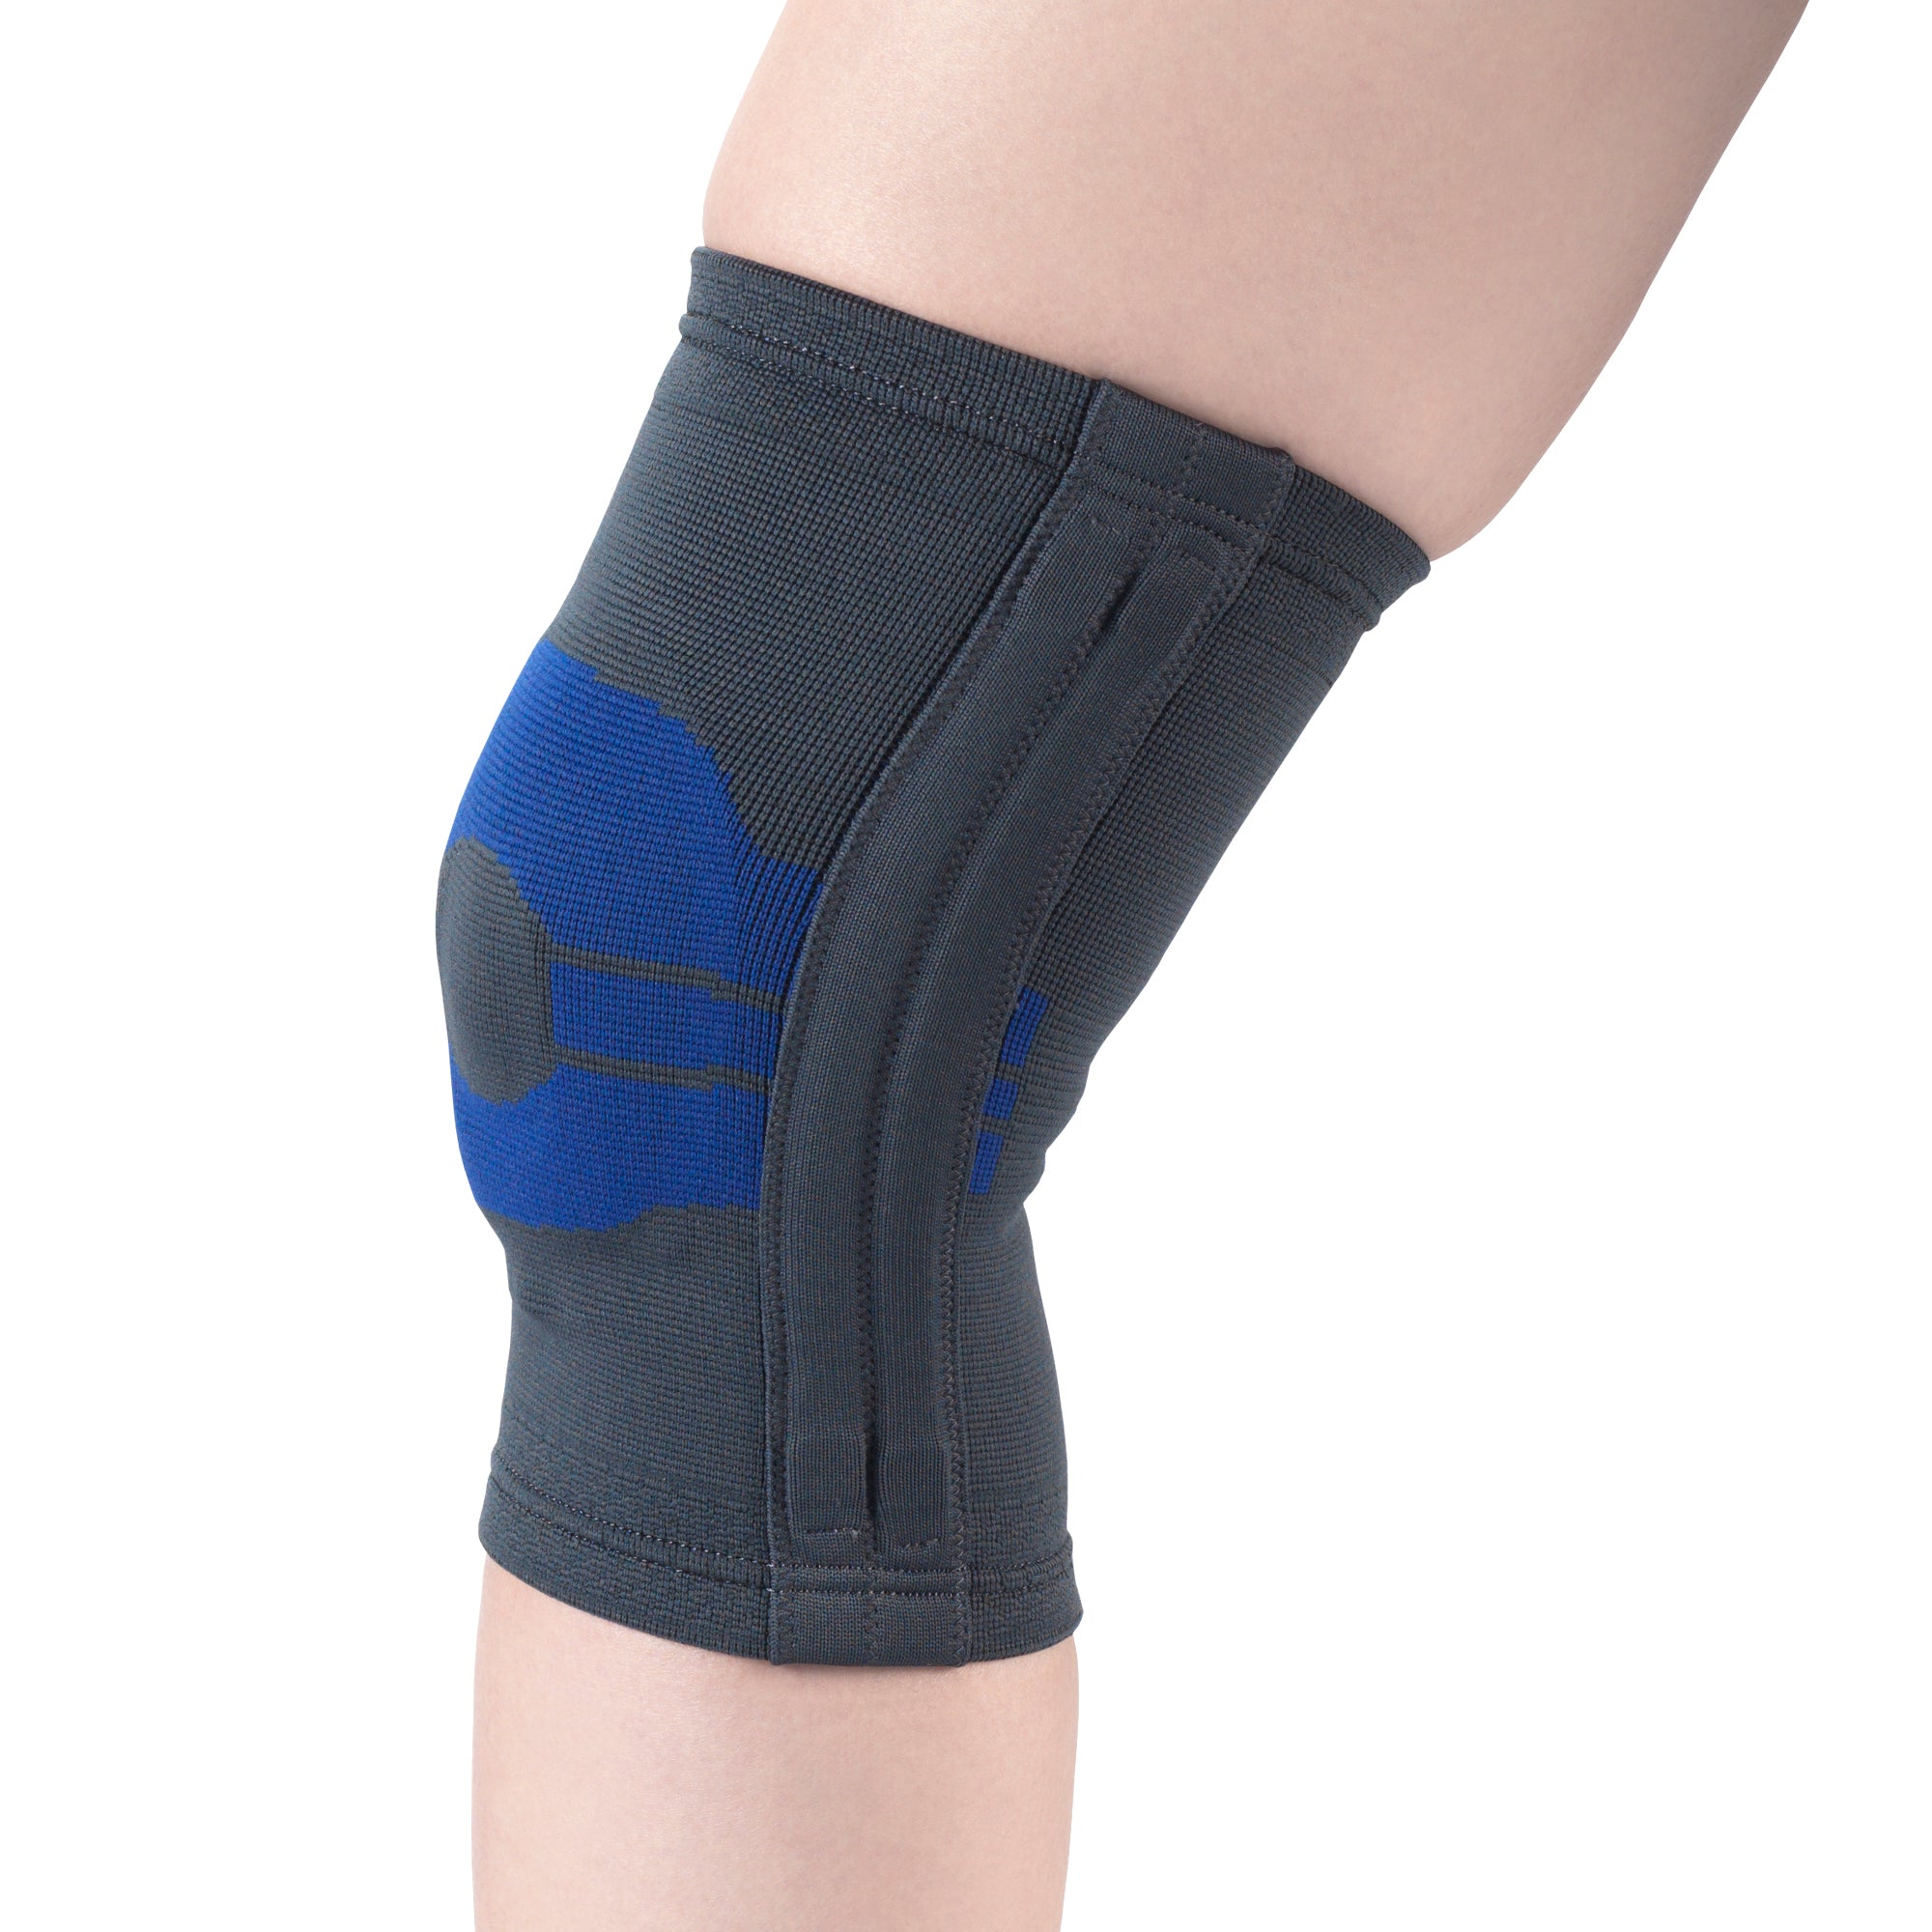 --Side of KNEE SUPPORT WITH COMPRESSION GEL INSERT AND FLEXIBLE STAYS --